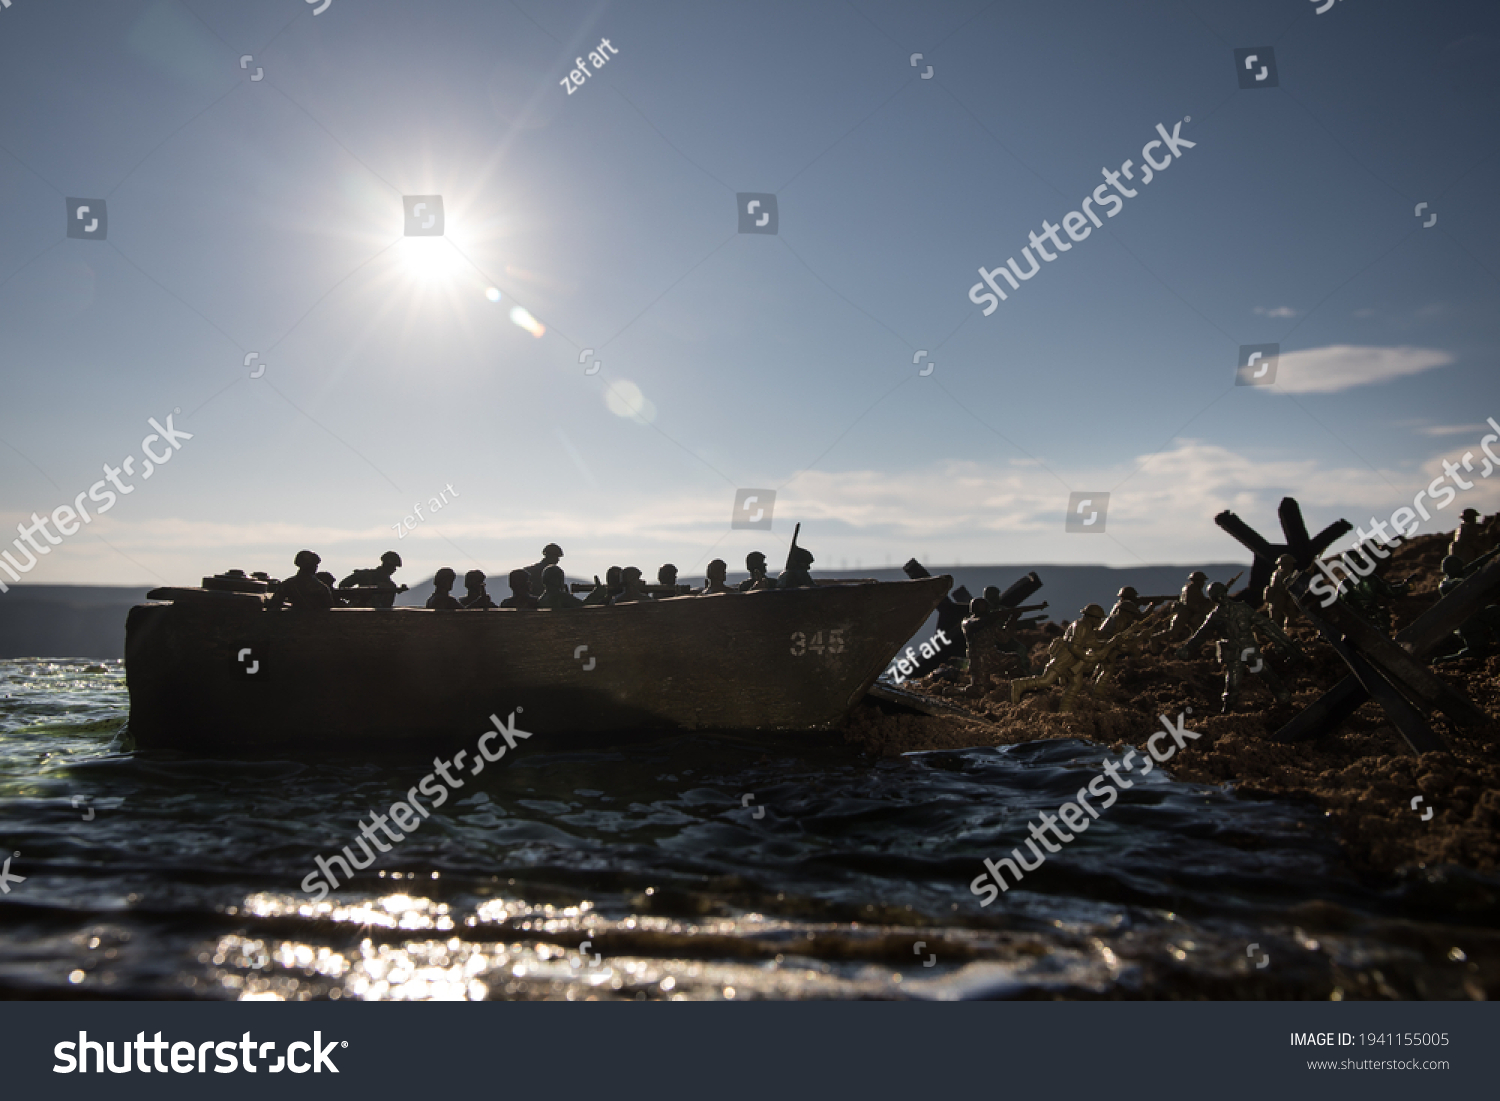 World War 2 reenactment (D-day). Creative decoration with toy soldiers, landing crafts and hedgehogs. Battle scene of Normandy landing on June 6, 1944. Selective focus #1941155005